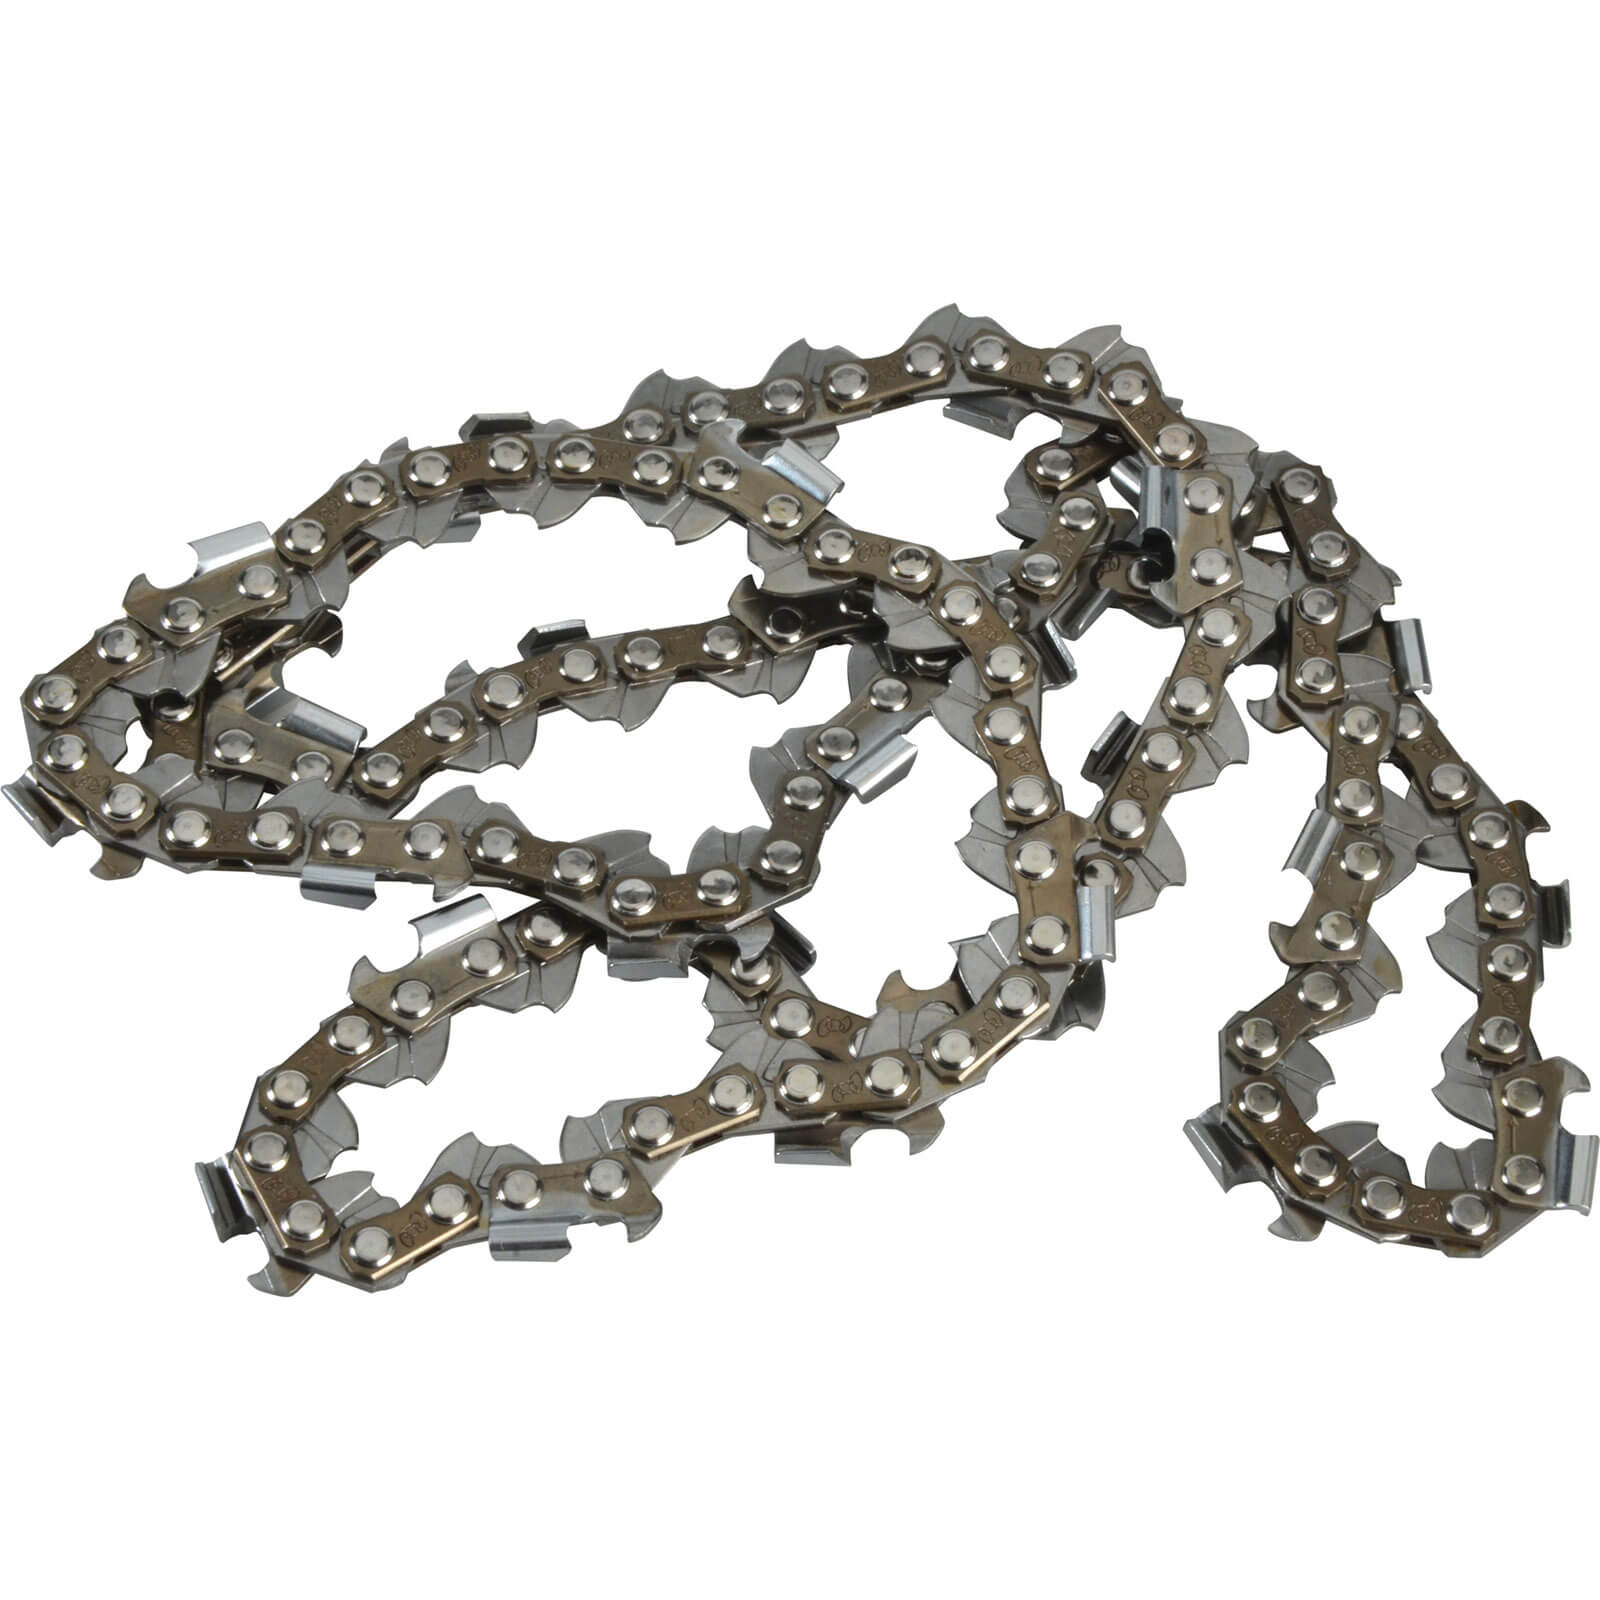 Photo of Alm Ch072 Replacement Chainsaw Chain Fits Saws With A 45cm Bar And 72 Drive Links 450mm